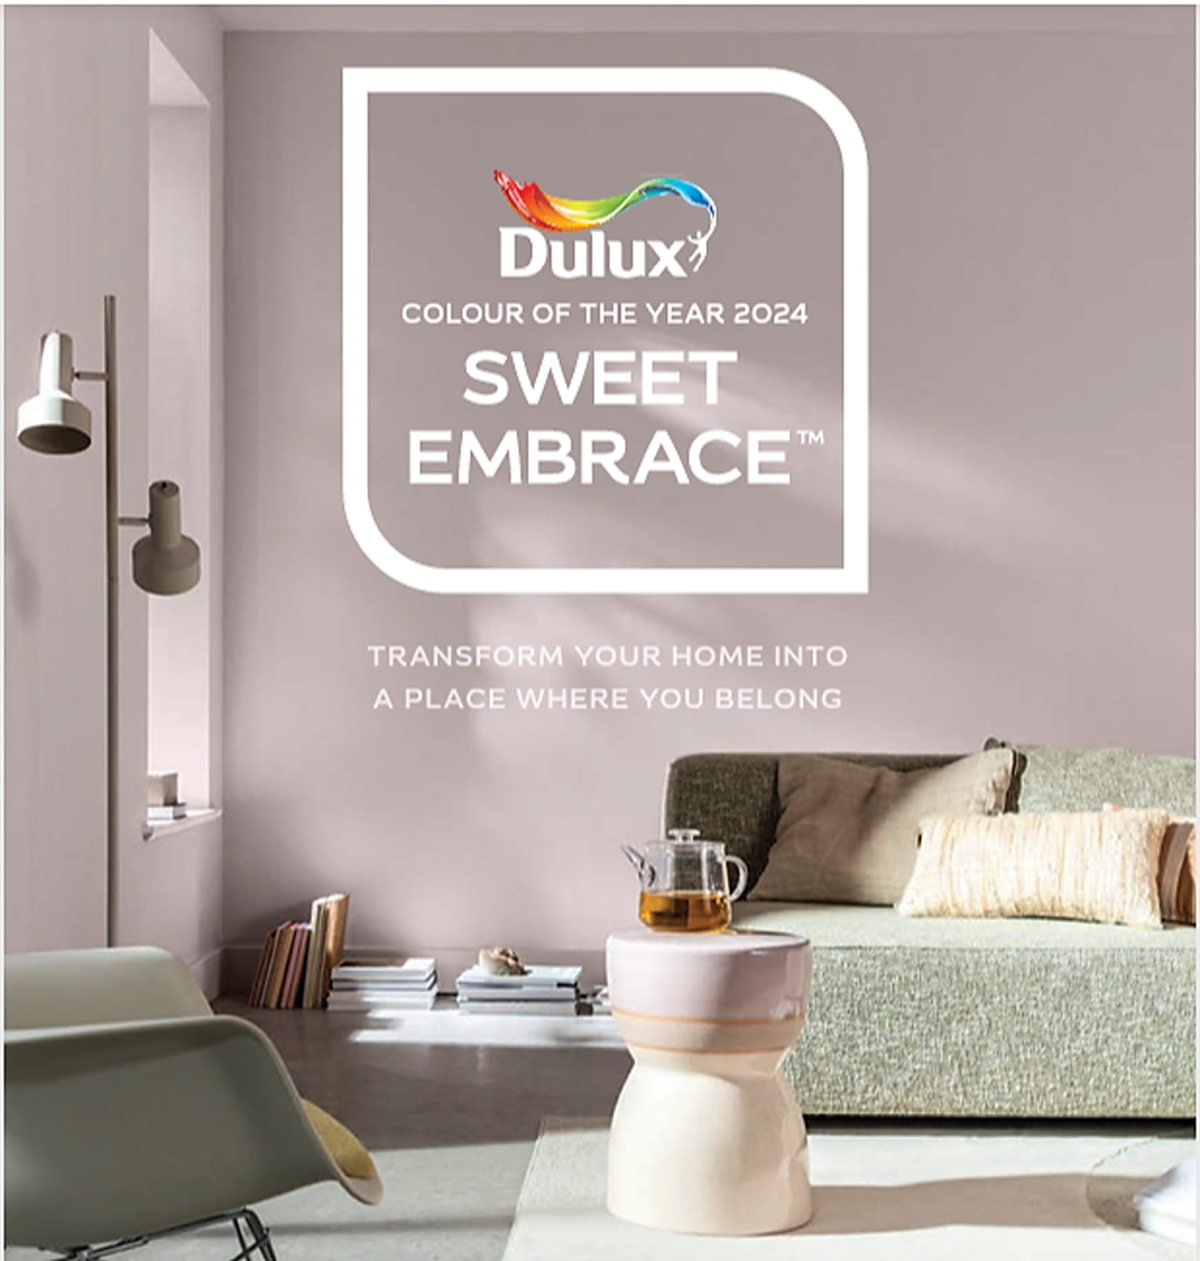 Hamilton wiring accessories work with the Dulux Colour of the year 2024